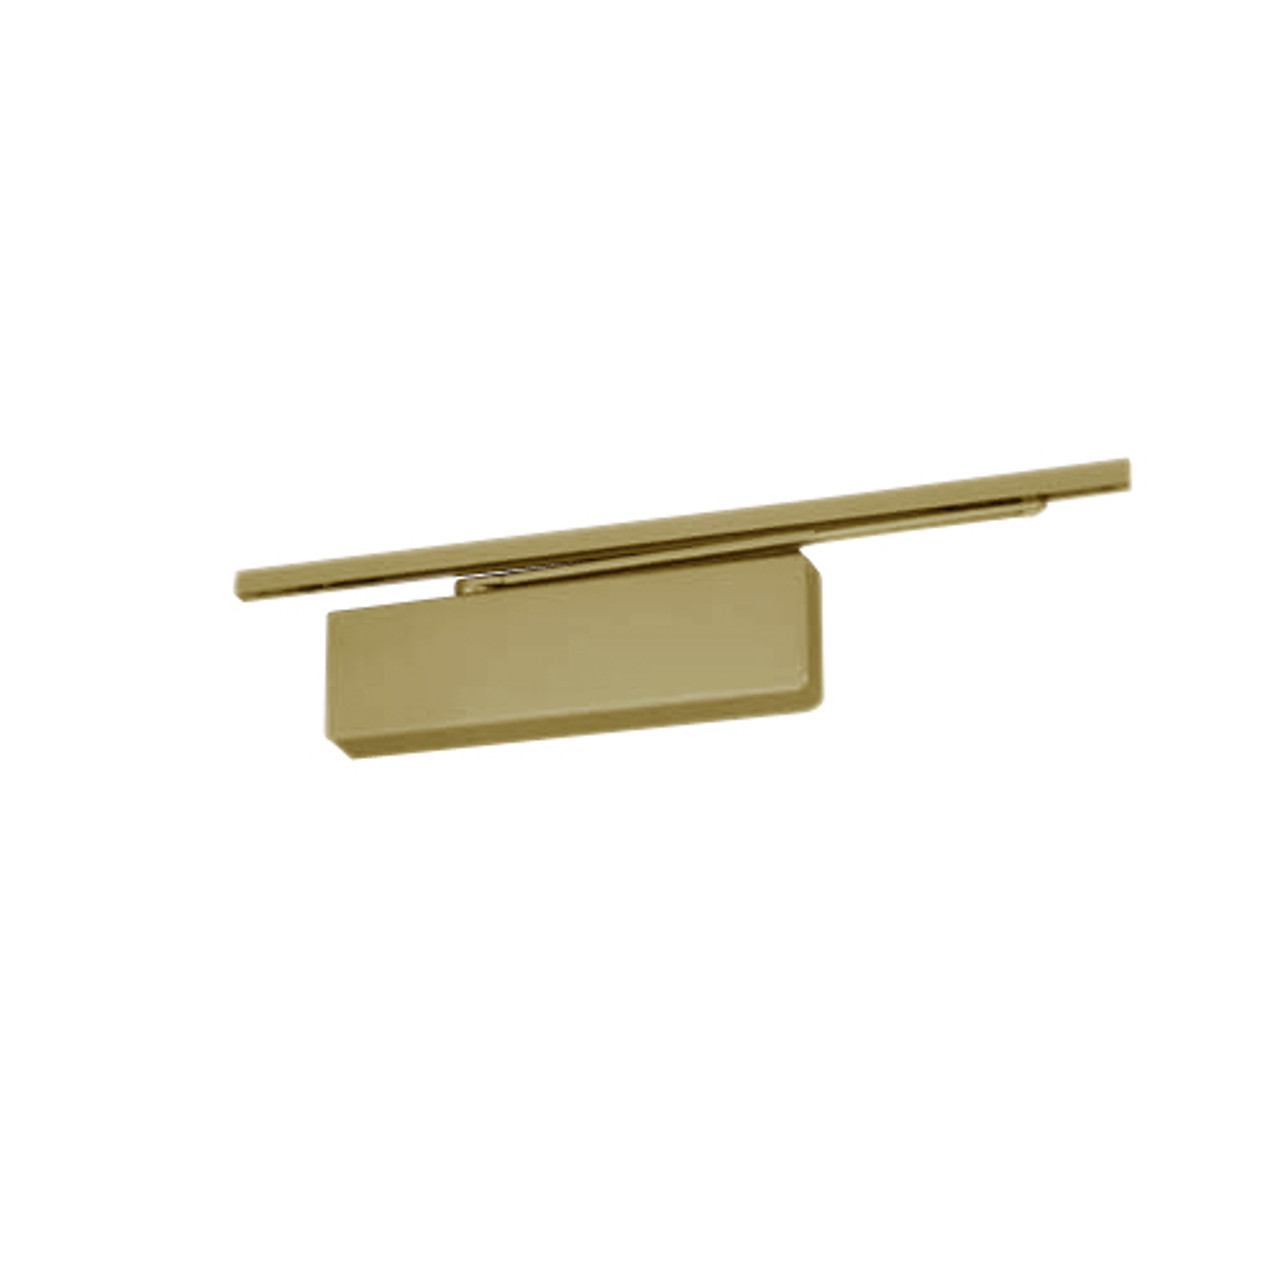 PS7570ST-696-RH Norton 7570 Series Security Door Closer with Push Side Slide Track Arm in Gold Finish